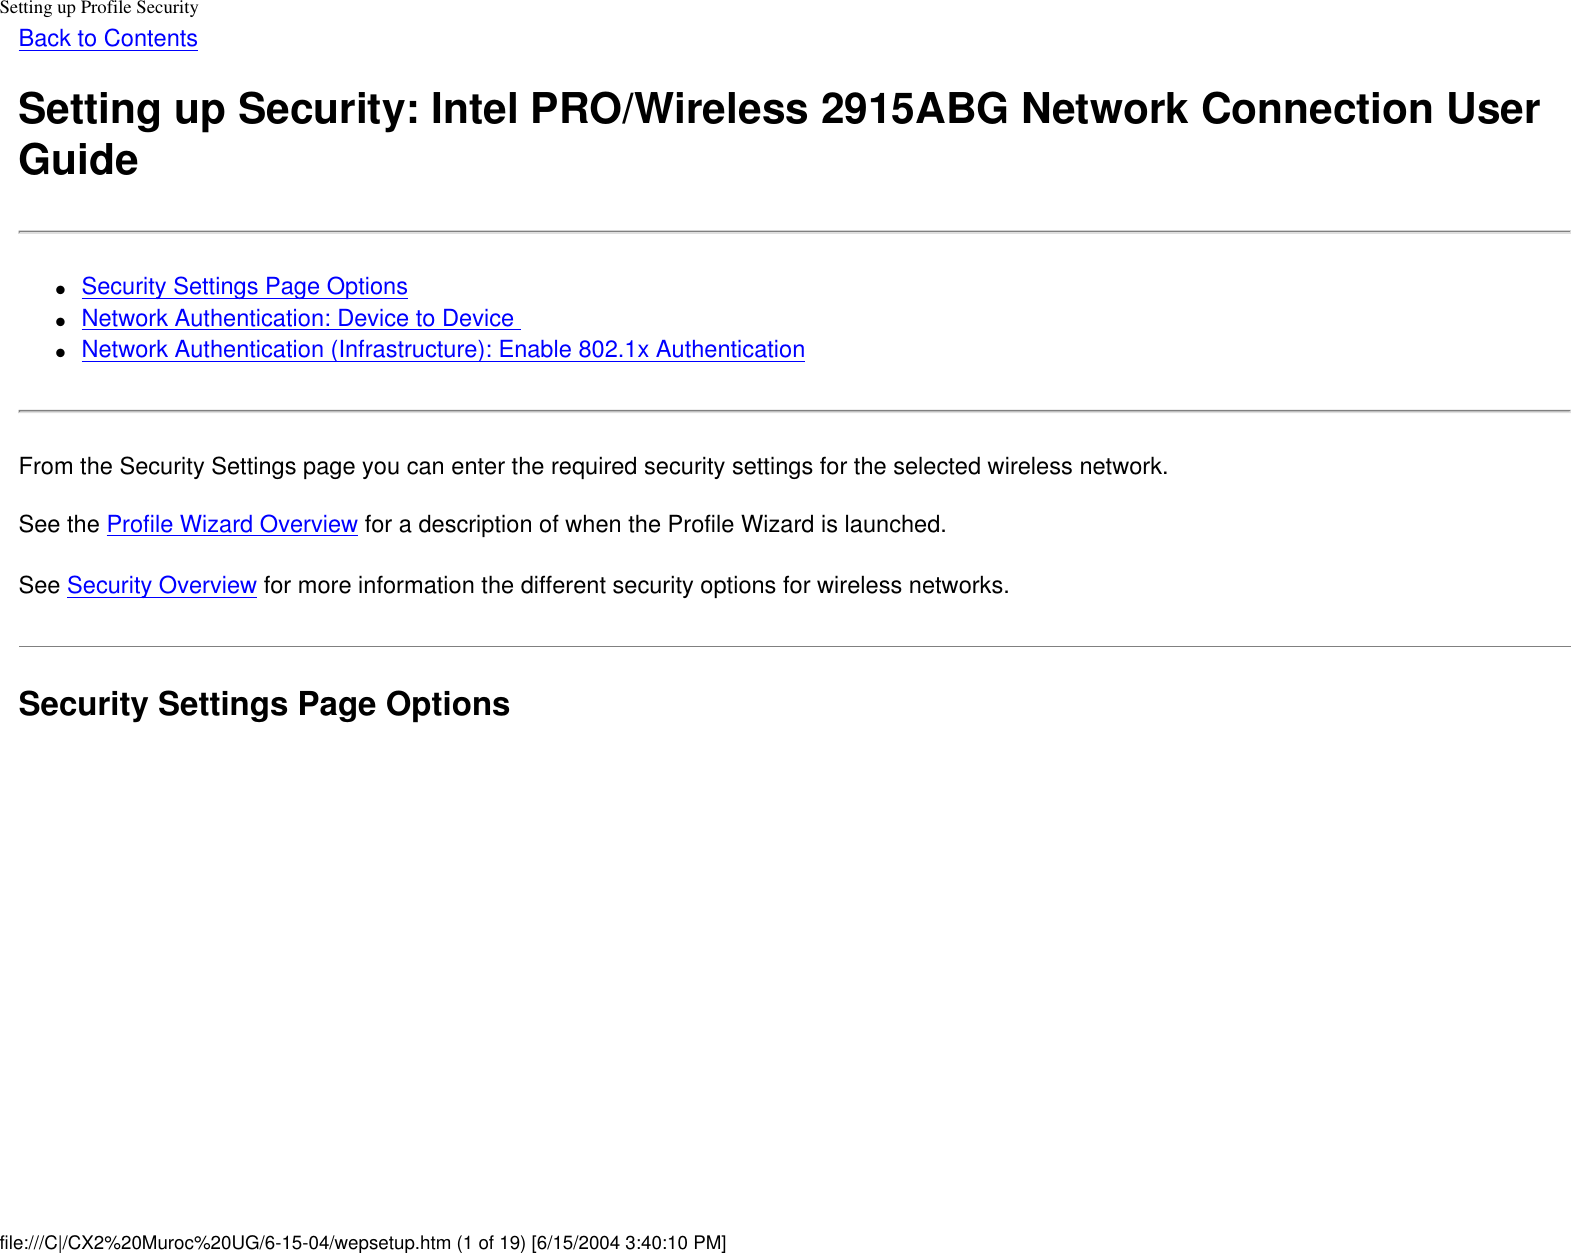 Setting up Profile SecurityBack to ContentsSetting up Security: Intel PRO/Wireless 2915ABG Network Connection User Guide●     Security Settings Page Options ●     Network Authentication: Device to Device ●     Network Authentication (Infrastructure): Enable 802.1x AuthenticationFrom the Security Settings page you can enter the required security settings for the selected wireless network. See the Profile Wizard Overview for a description of when the Profile Wizard is launched.See Security Overview for more information the different security options for wireless networks. Security Settings Page Optionsfile:///C|/CX2%20Muroc%20UG/6-15-04/wepsetup.htm (1 of 19) [6/15/2004 3:40:10 PM]